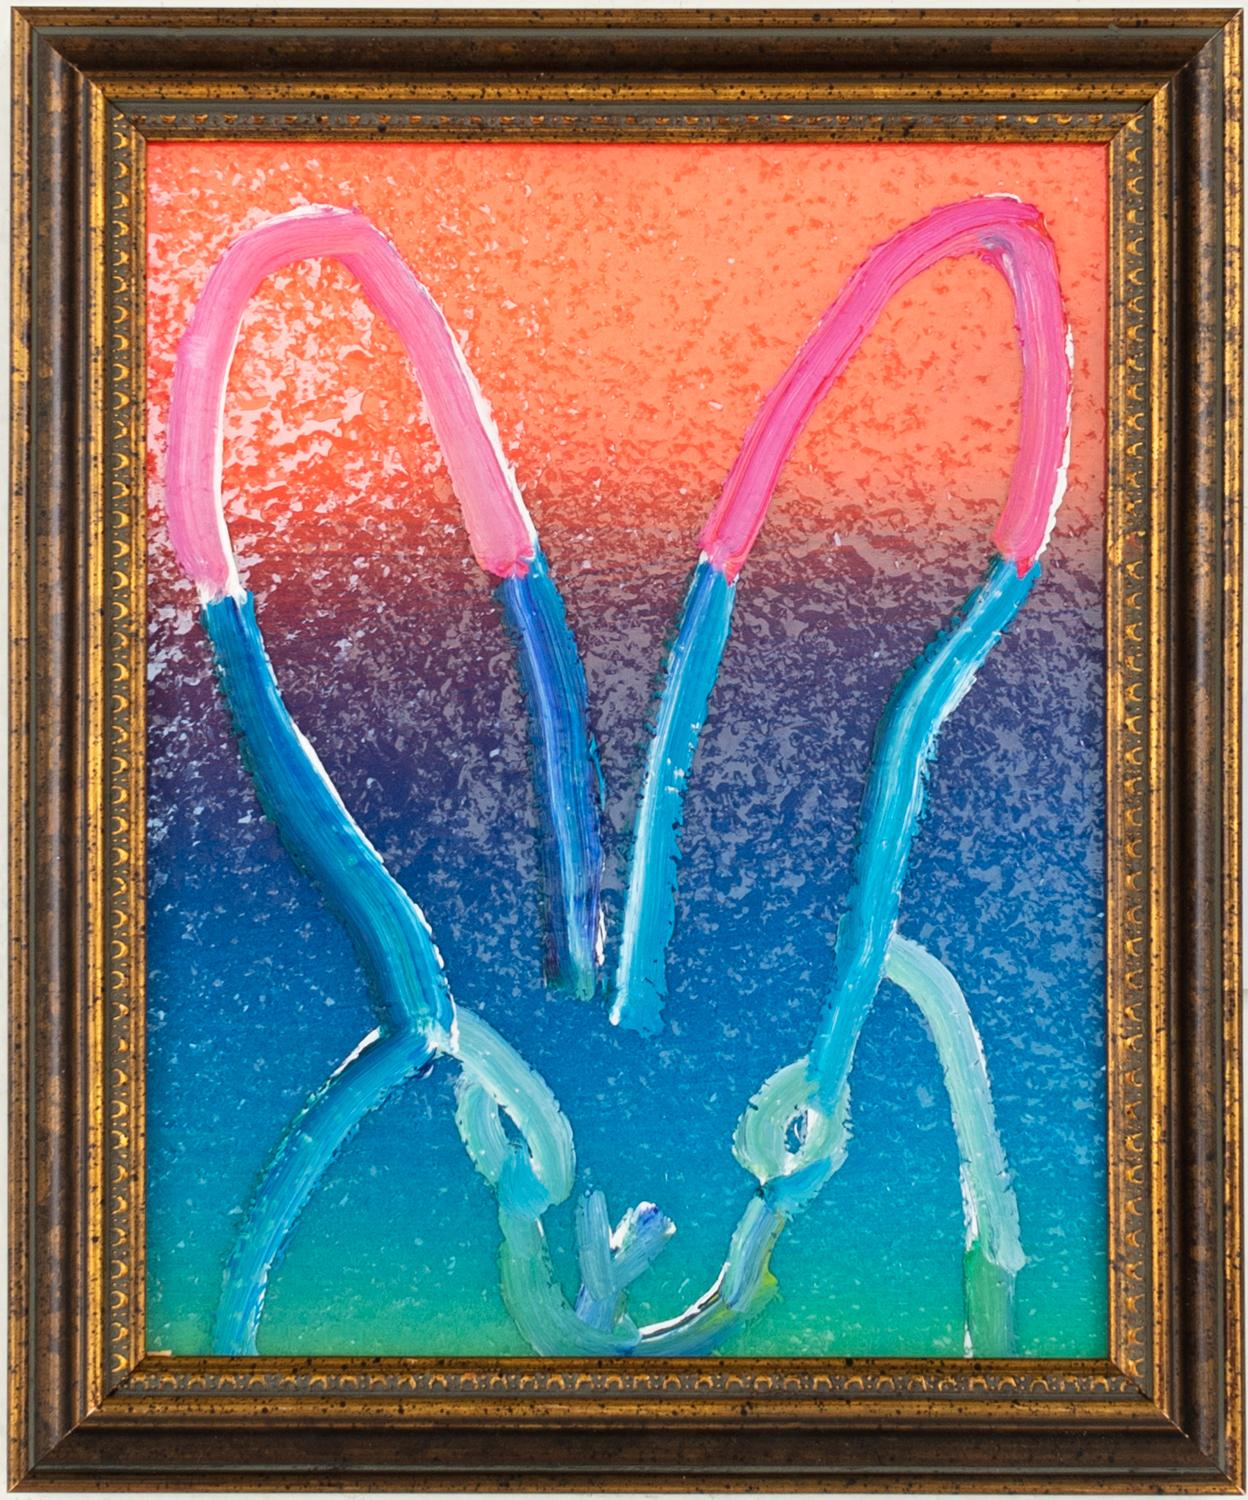 Hunt Slonem Figurative Painting - Blue Sky "Bunny Painting" Original Blue and Pink Oil Painting in Vintage Frame